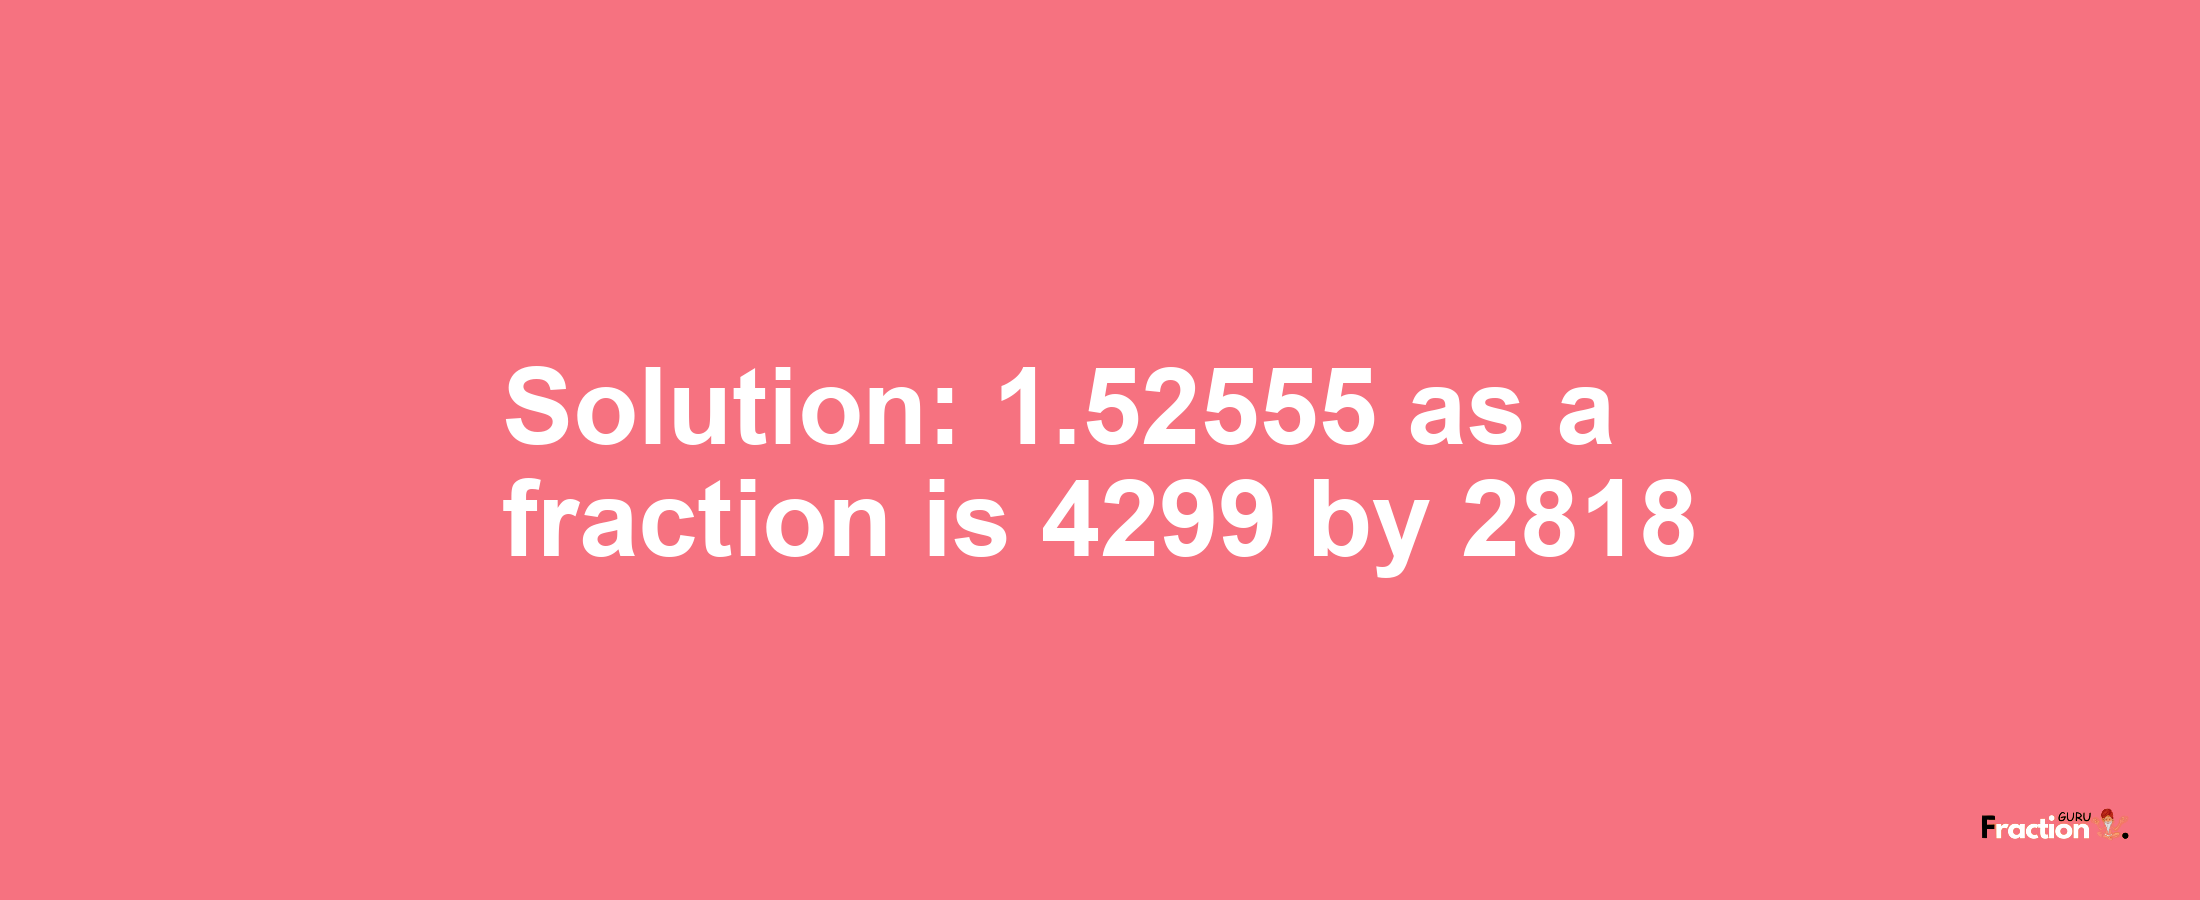 Solution:1.52555 as a fraction is 4299/2818